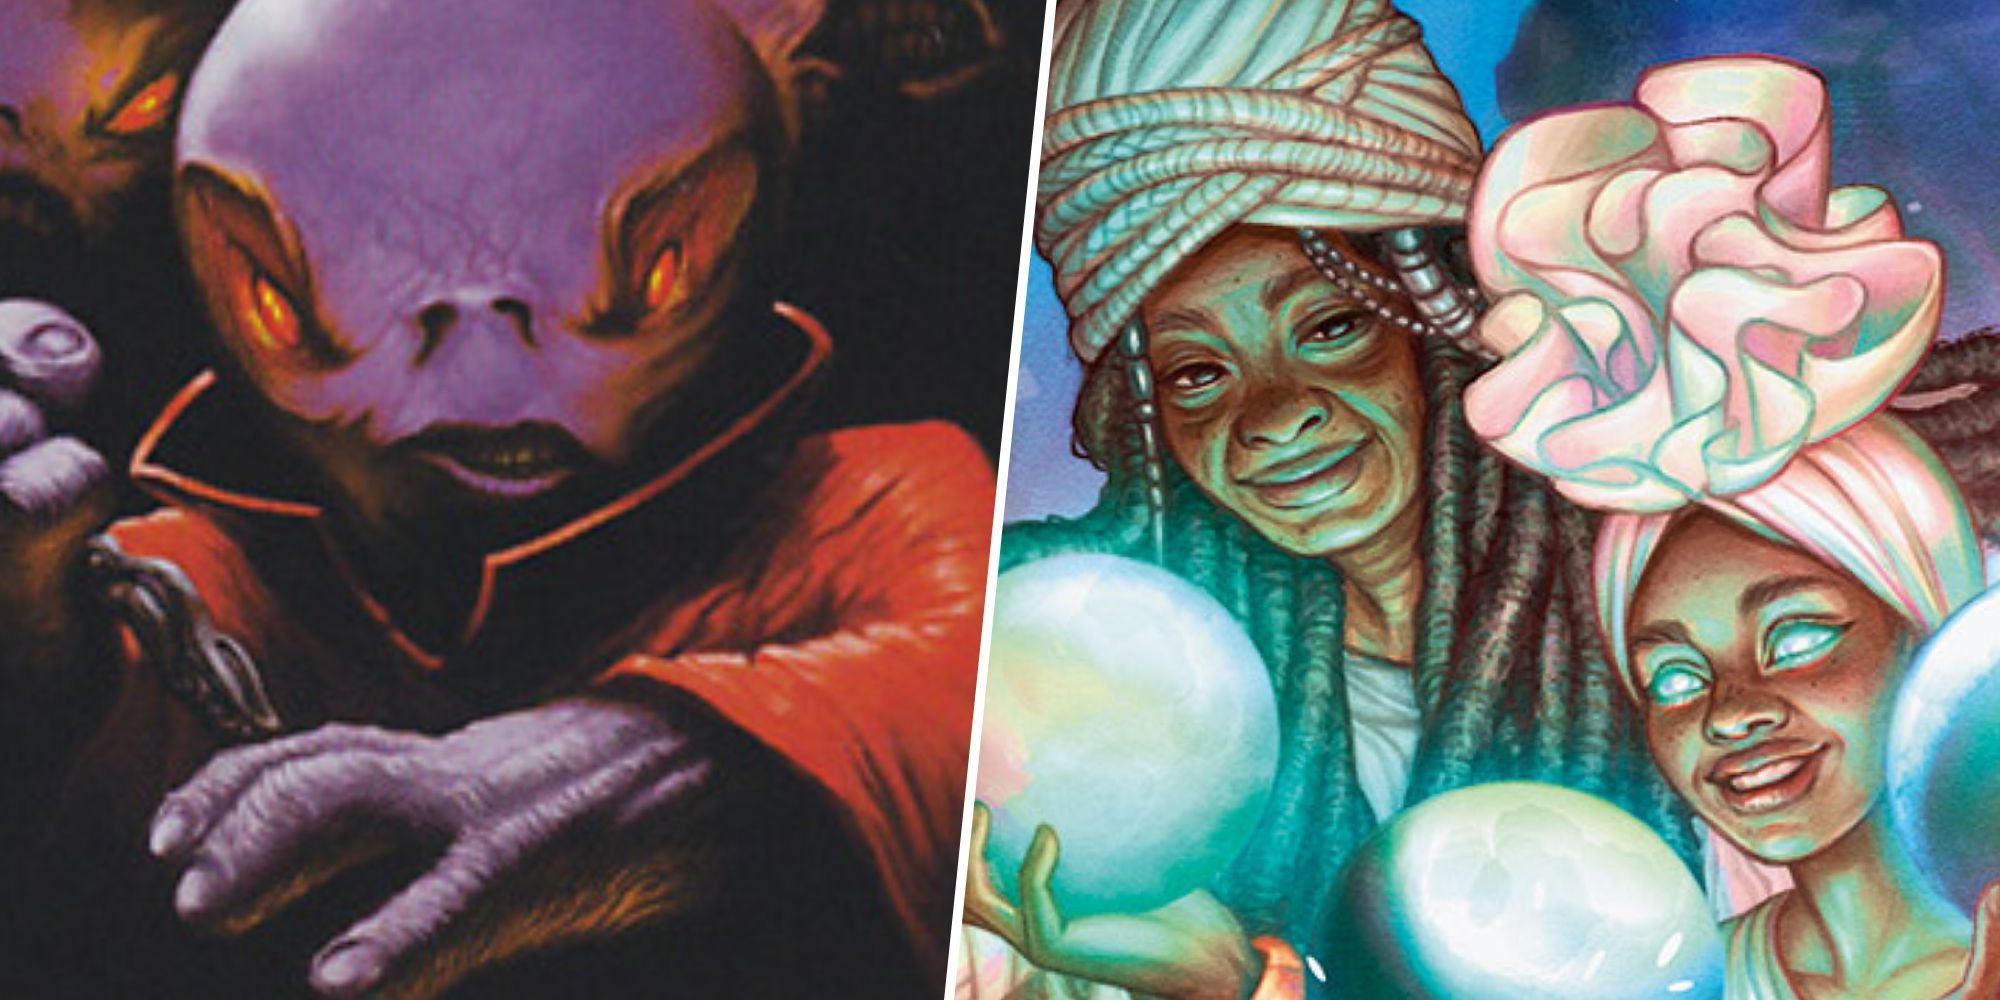 Left: Artwork for the MTG card Violent Outbust, showing an angry alien creature. Right: artwork for the MTG card Ponder, showing an older woman and a young girl, pondering magical orbs.